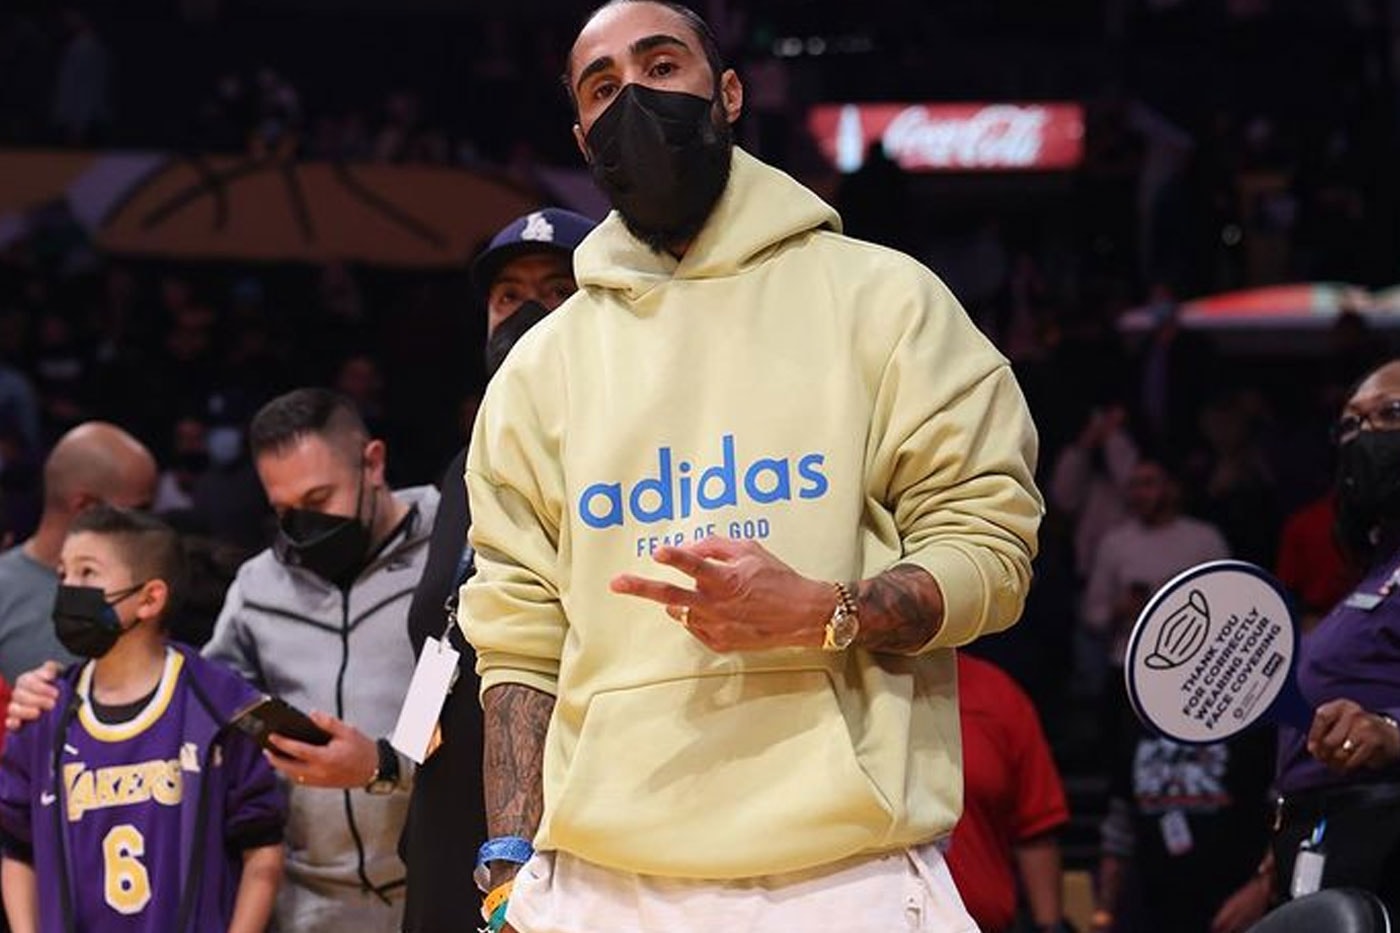 Jerry Lorenzo Teases New adidas x Fear of God Collaboration essentials american designer street style sweater sportswear athleisure los angeles lakers lebron james russell westbrook kid cudi 